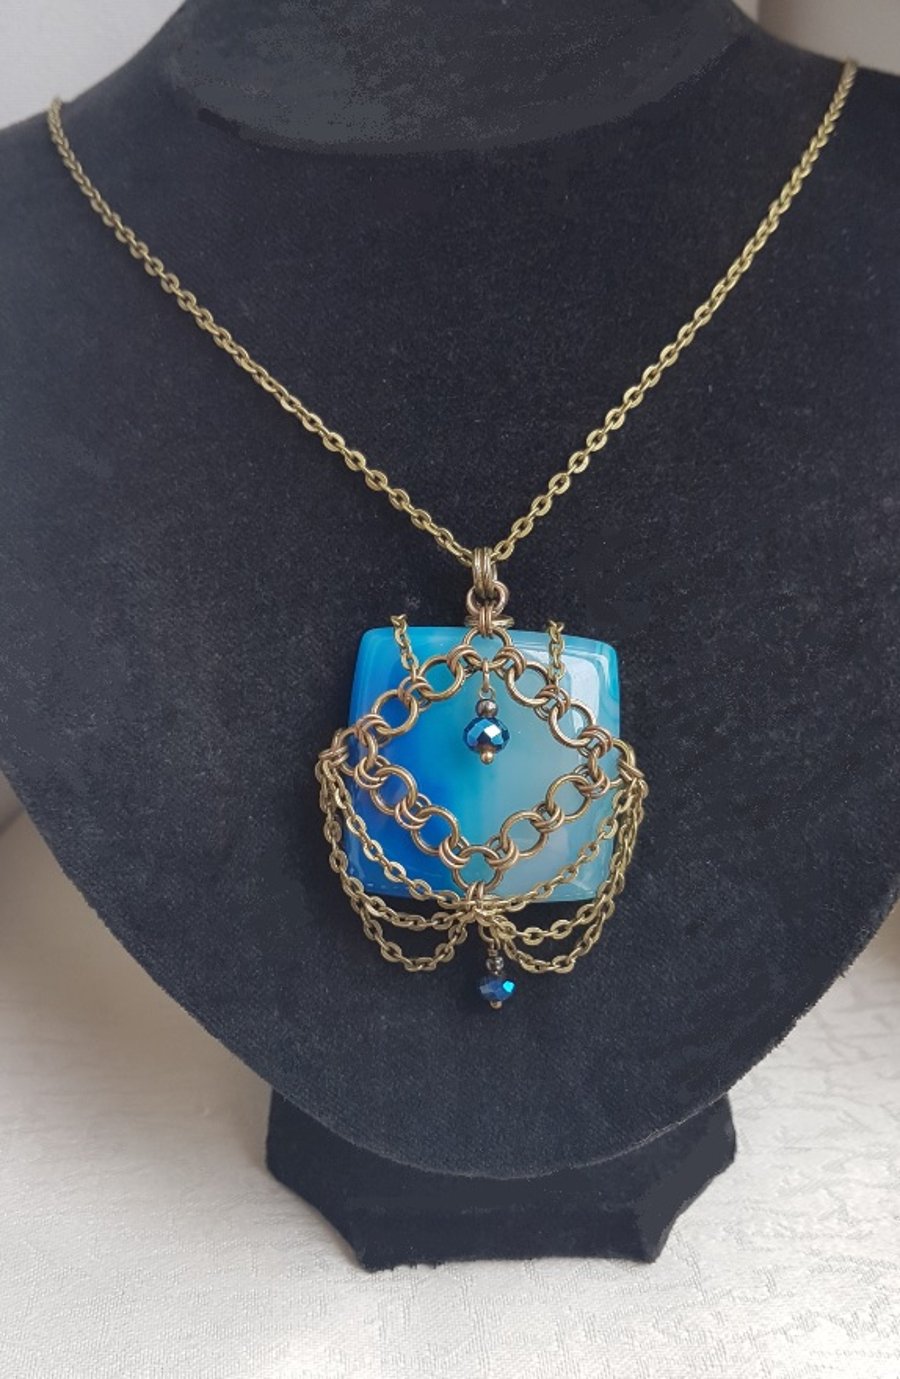 Gorgeous Blue Agate Chainmaille Pendant Necklace - Dark tones